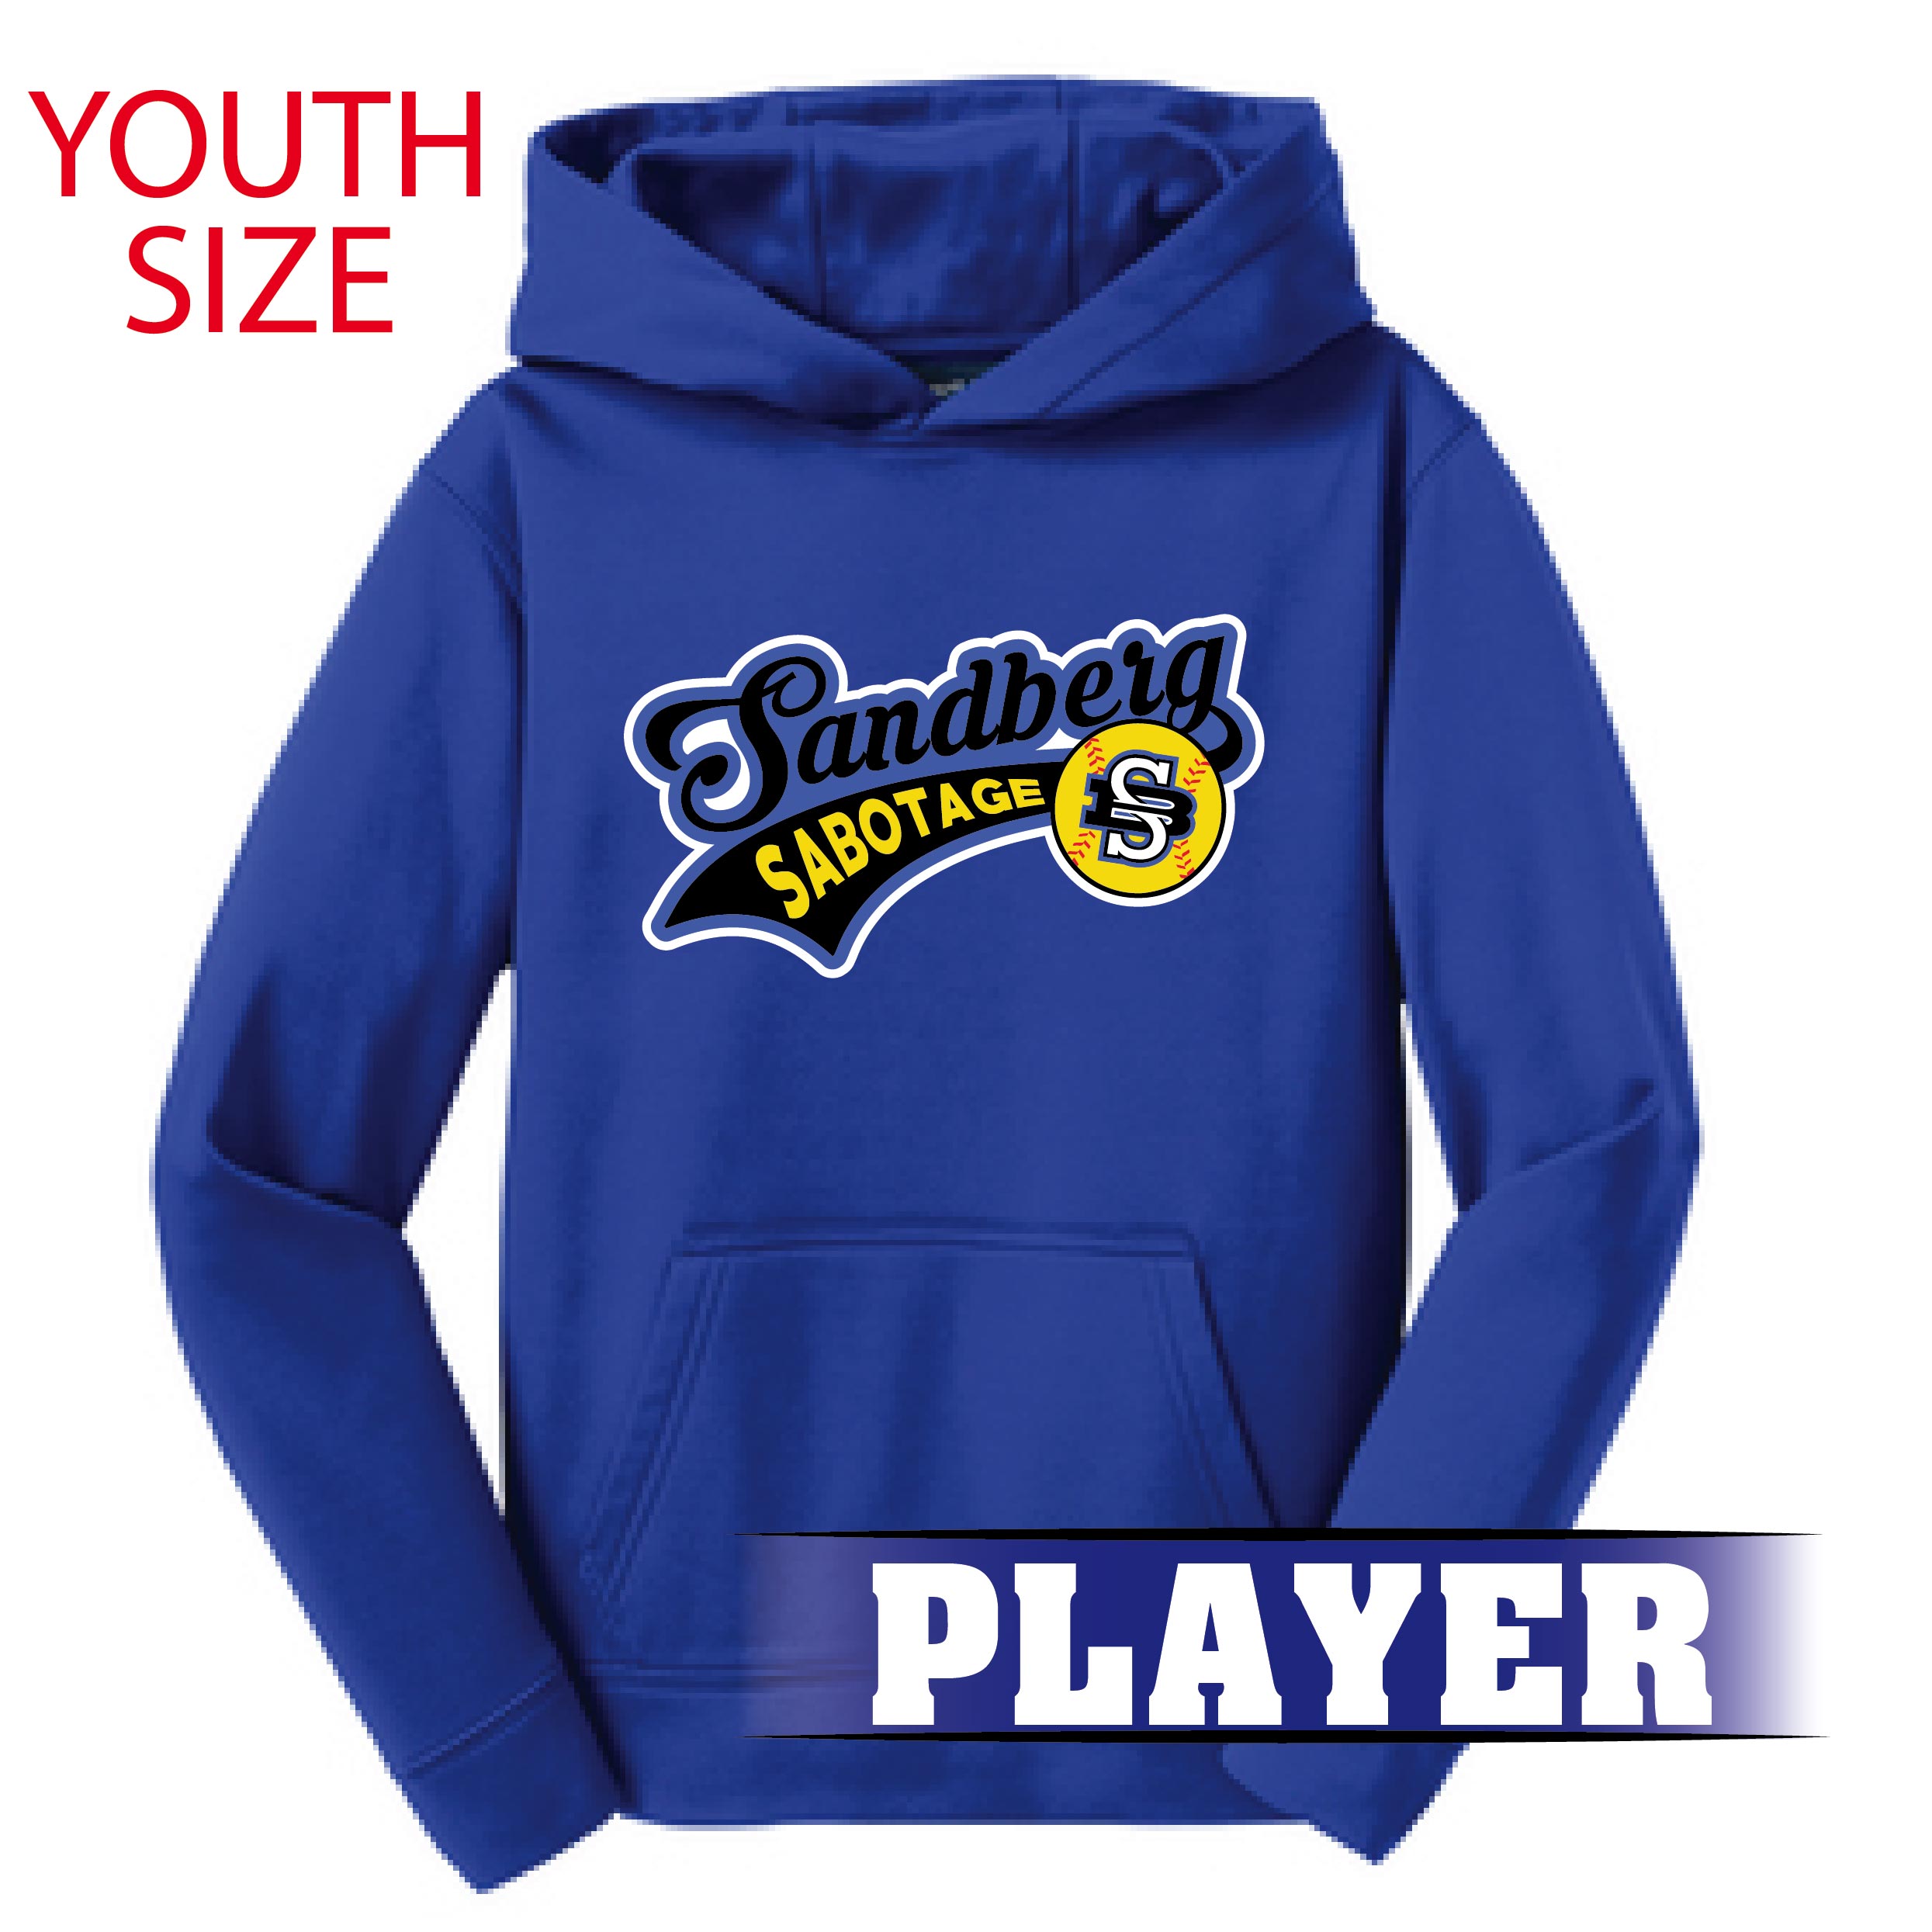 1-YST244 Youth Fleece Hooded Pullover